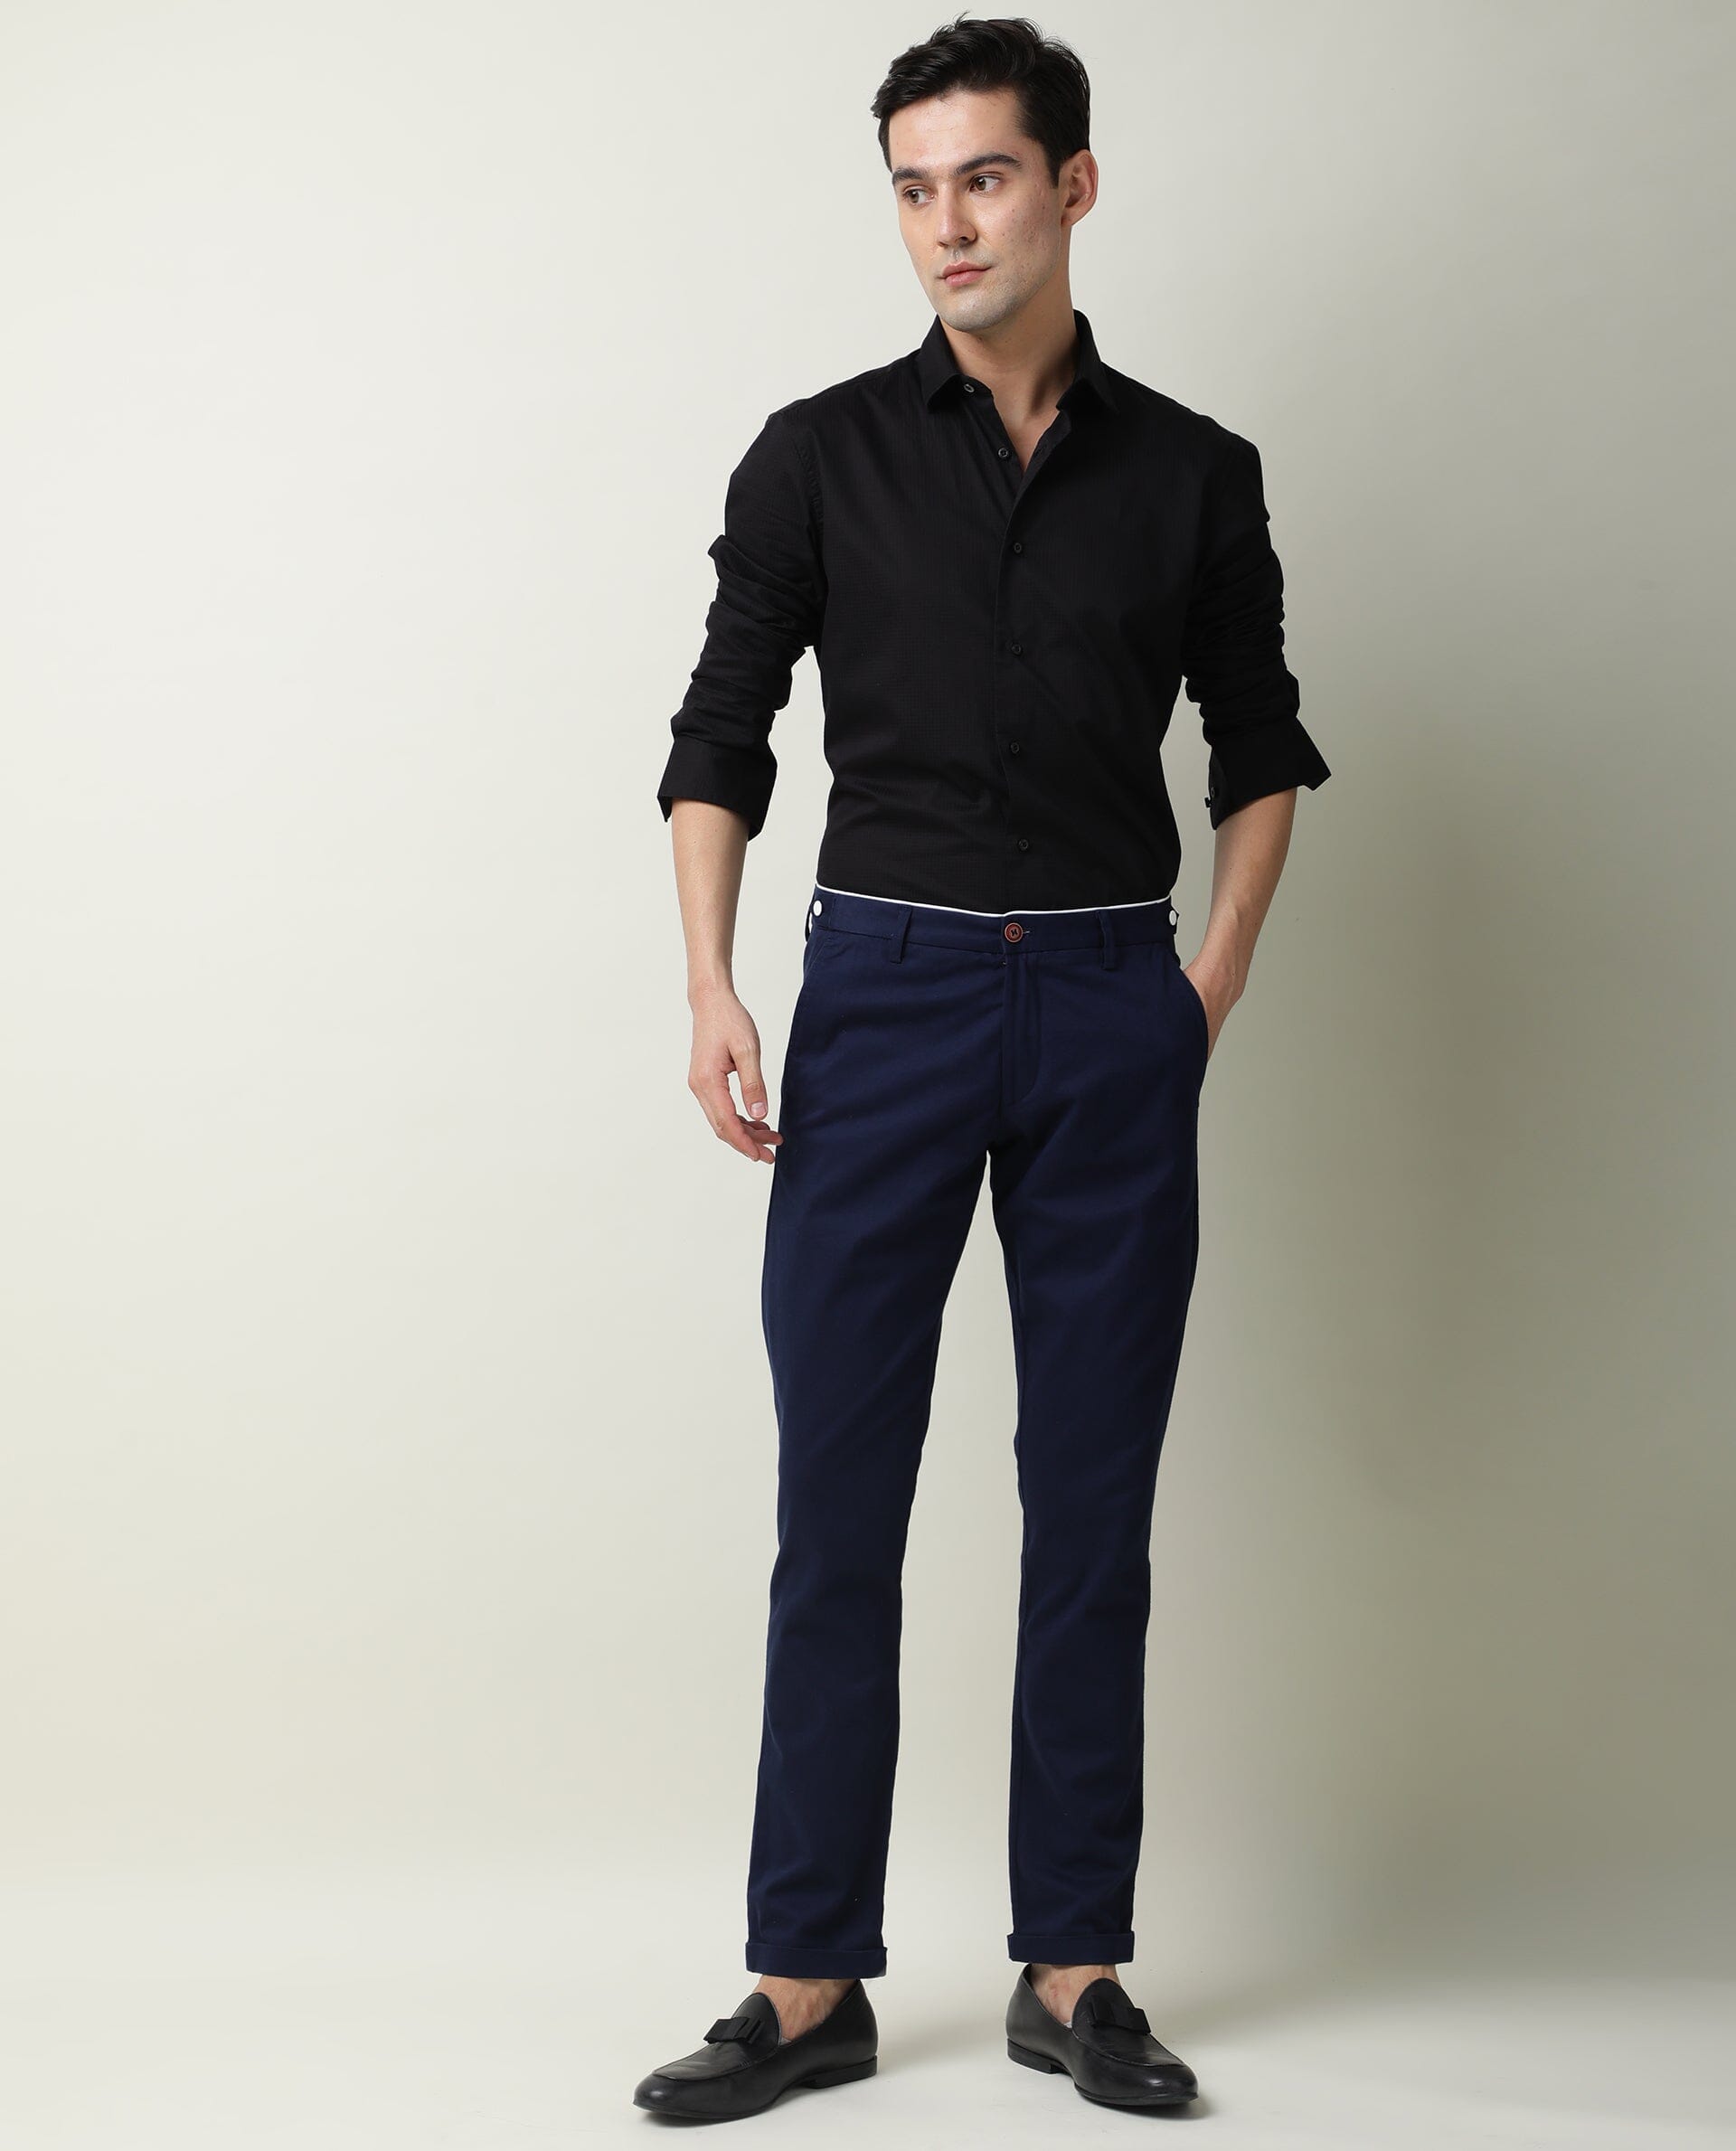 Black Shirt Jacket with Blue Pants Outfits For Men (67 ideas & outfits) |  Lookastic